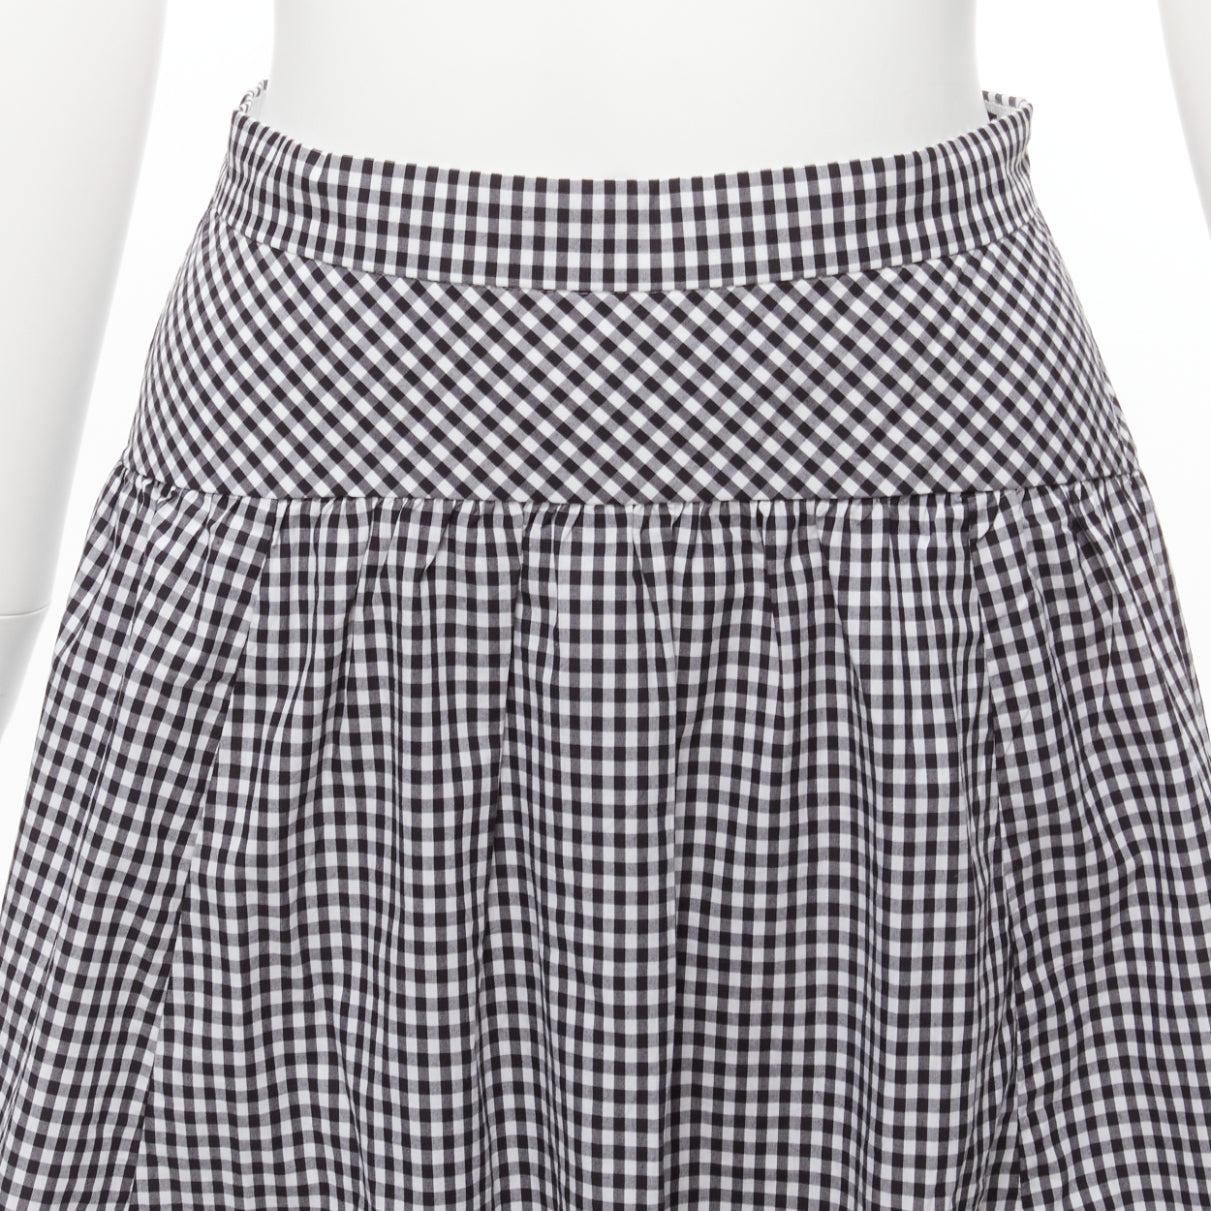 J.CREW white black gingham cotton panelled yoke A-line full skirt US0 XS
Reference: SNKO/A00413
Brand: J.Crew
Material: Cotton
Color: White, Black
Pattern: Gingham
Closure: Zip
Lining: White Fabric
Extra Details: Zip back.
Made in: